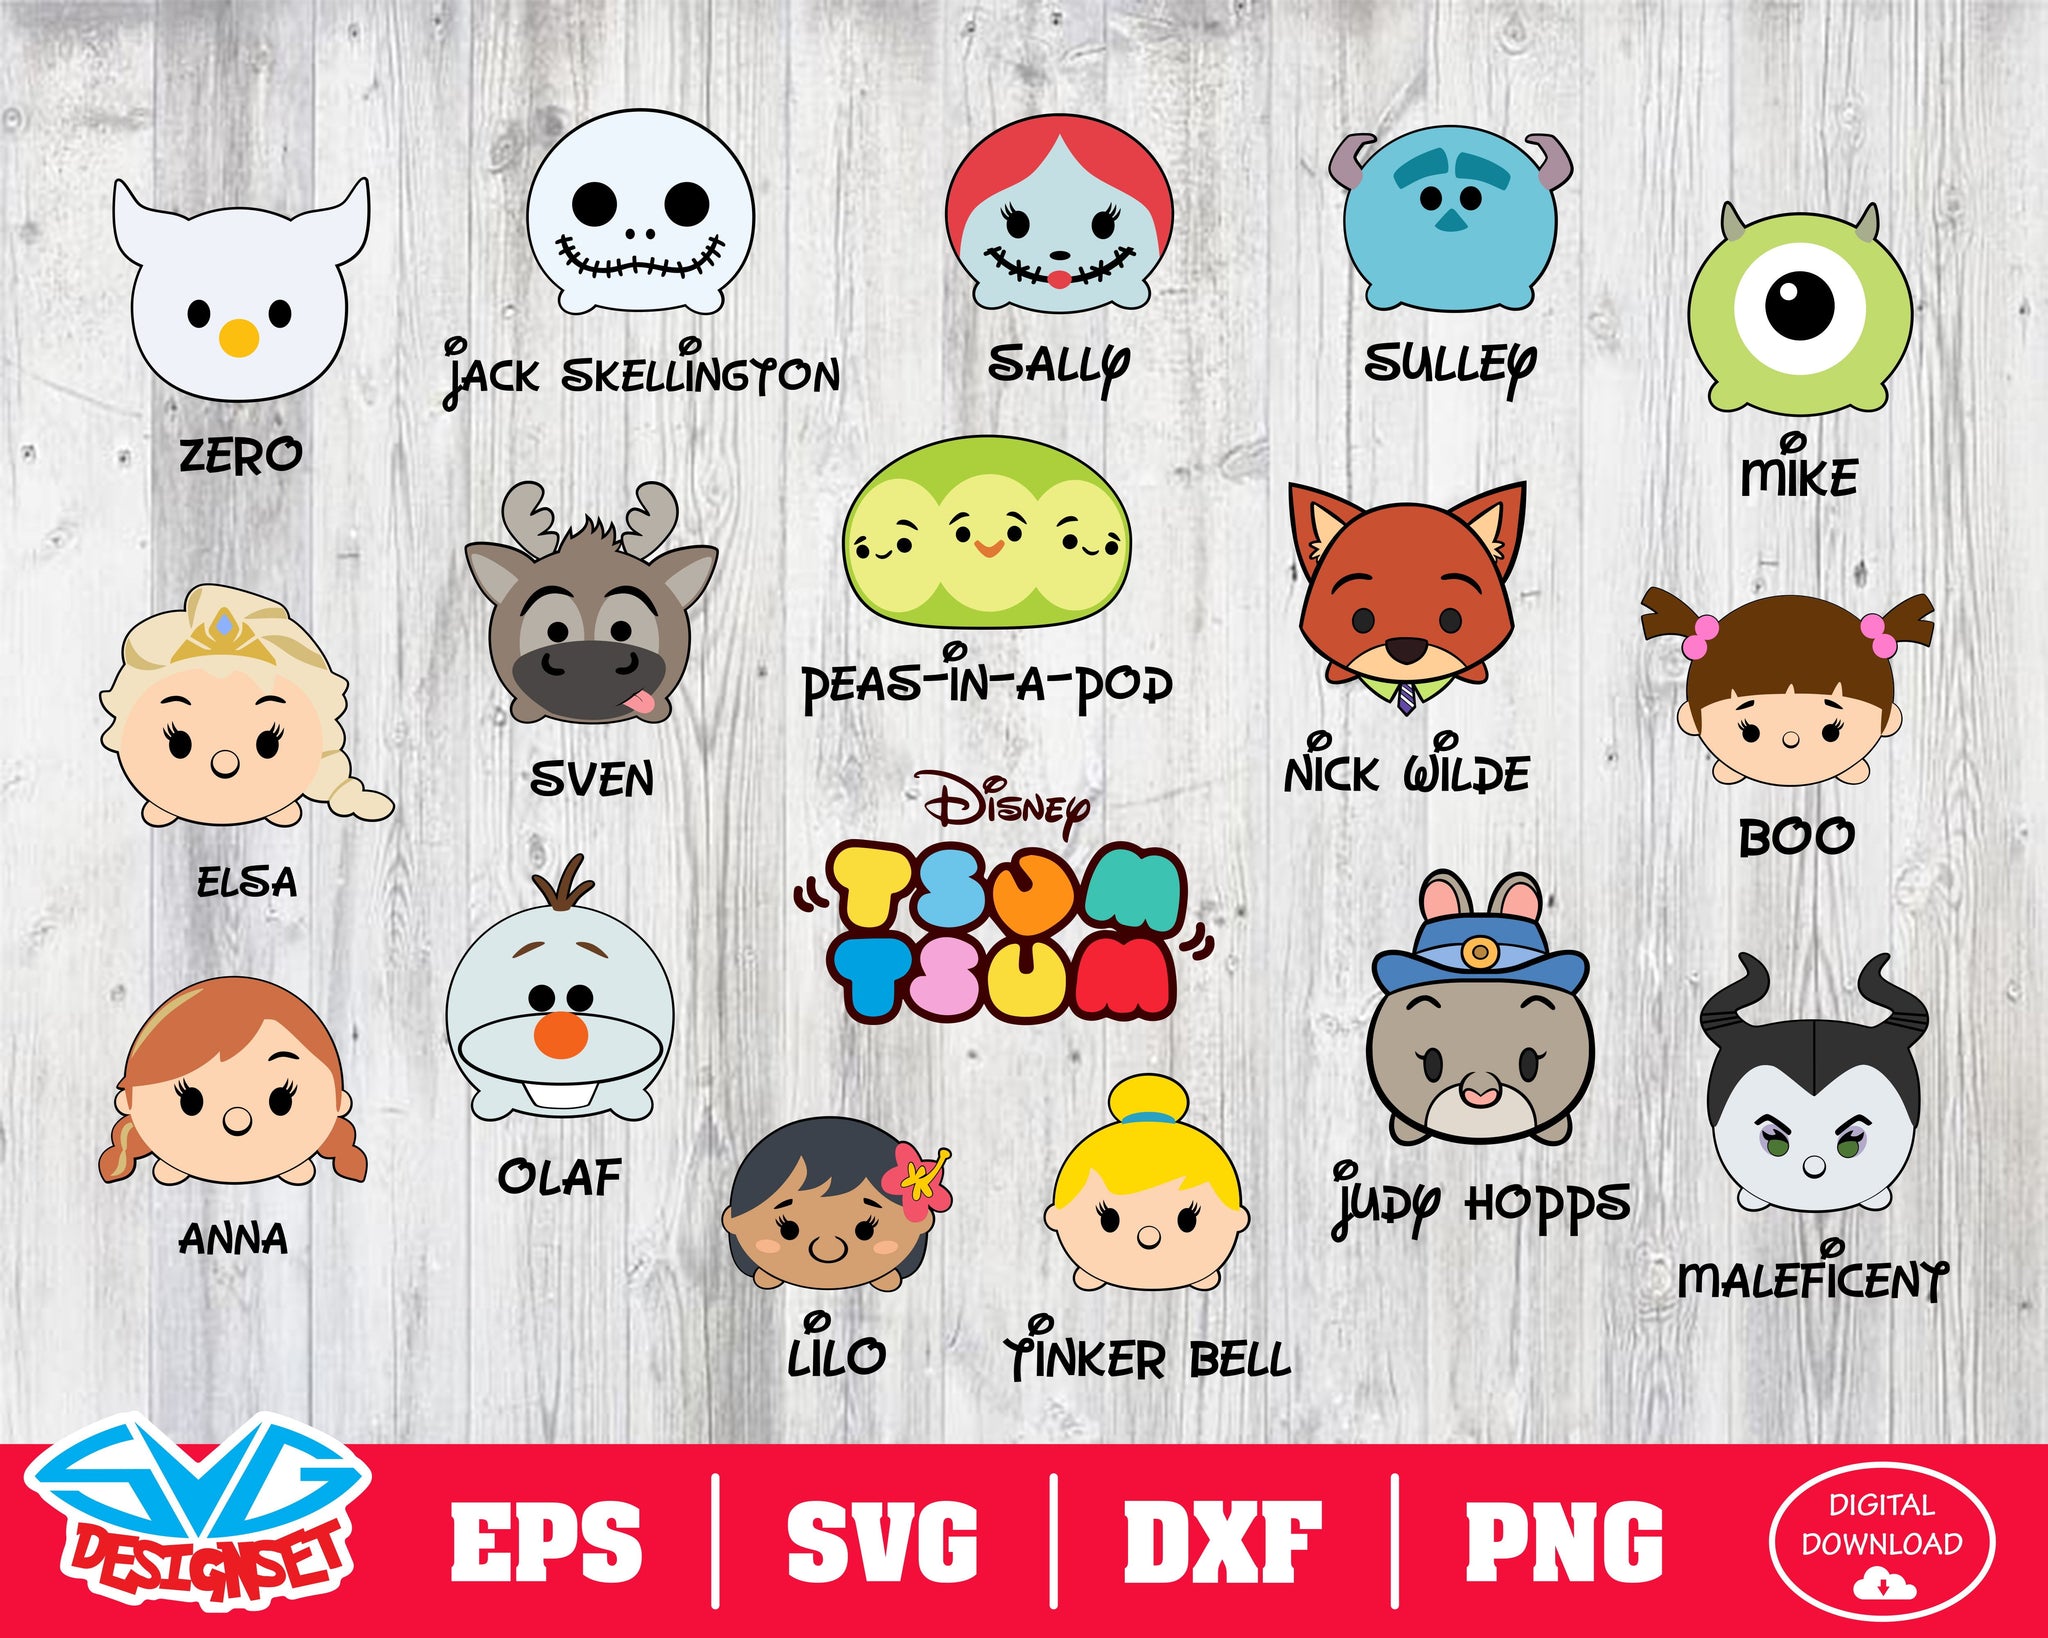 Tsum tsum Svg, Dxf, Eps, Png, Clipart, Silhouette and Cutfiles #4 - SVGDesignSets